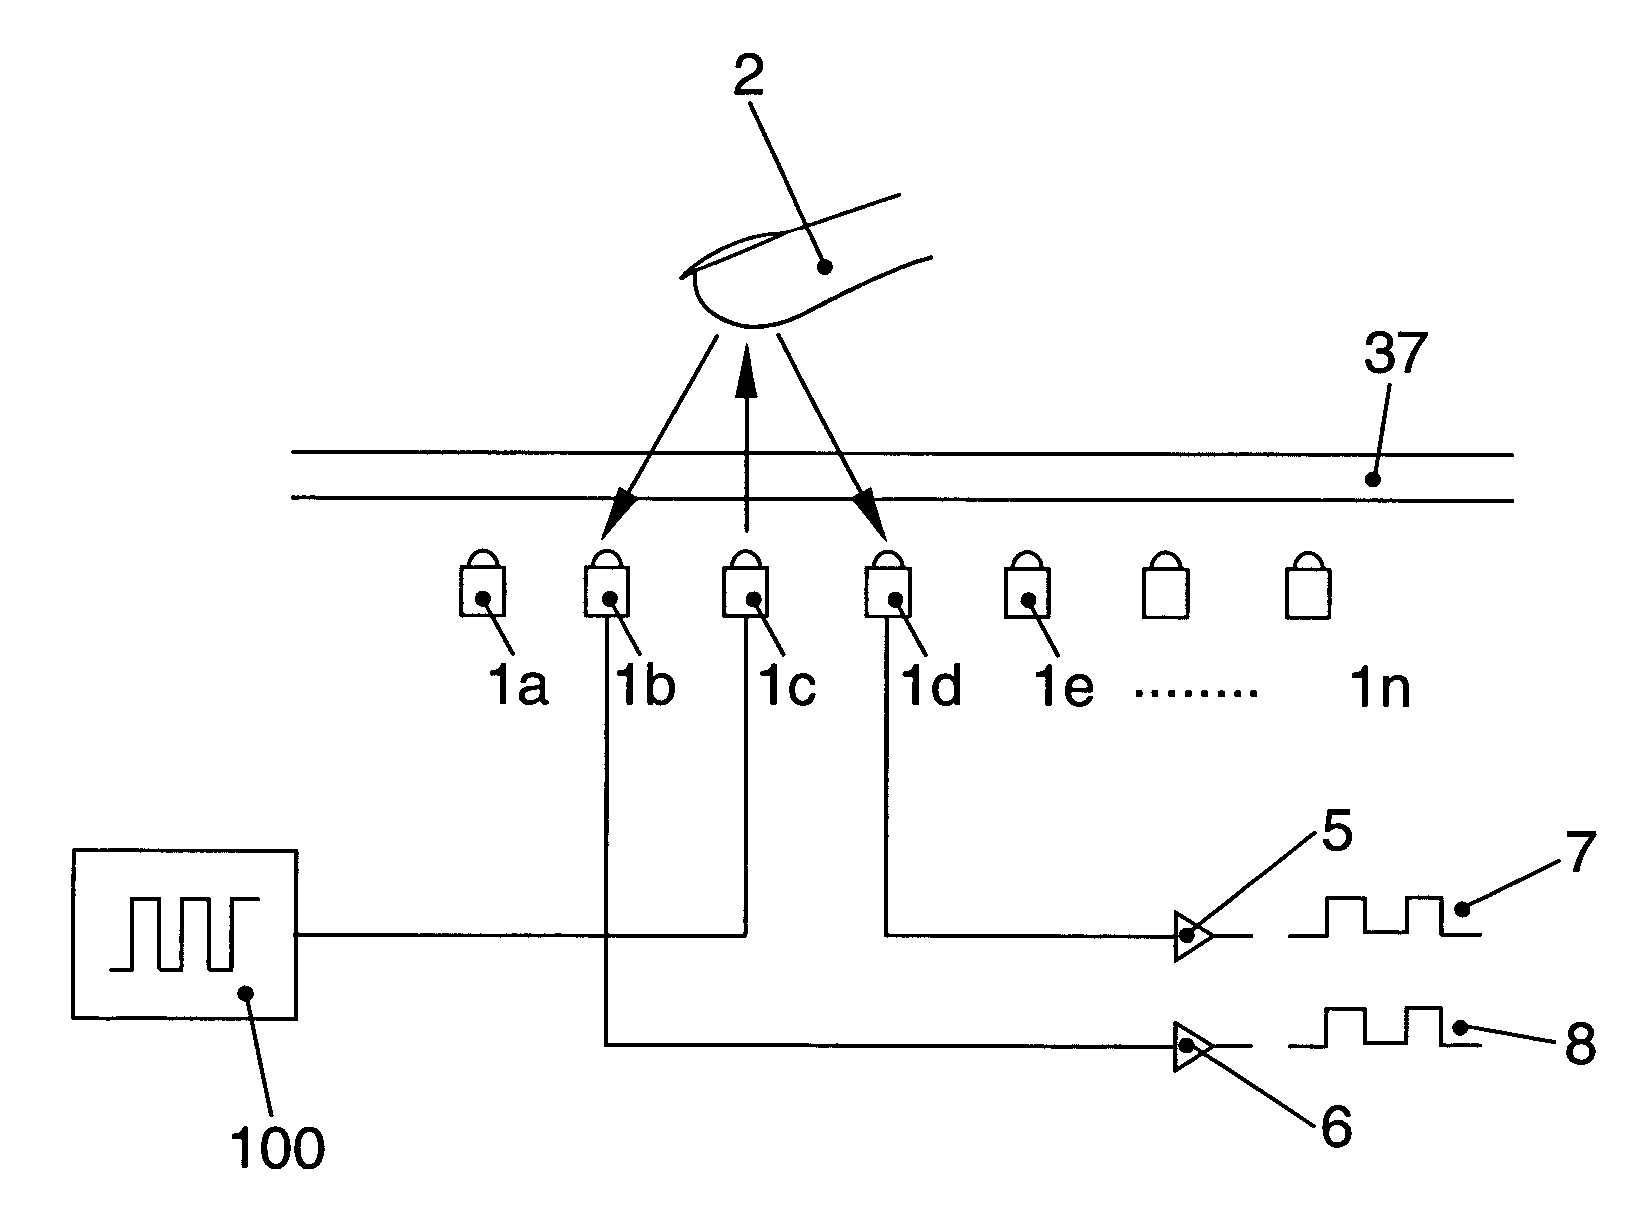 Circuit with an opto-electronic display unit